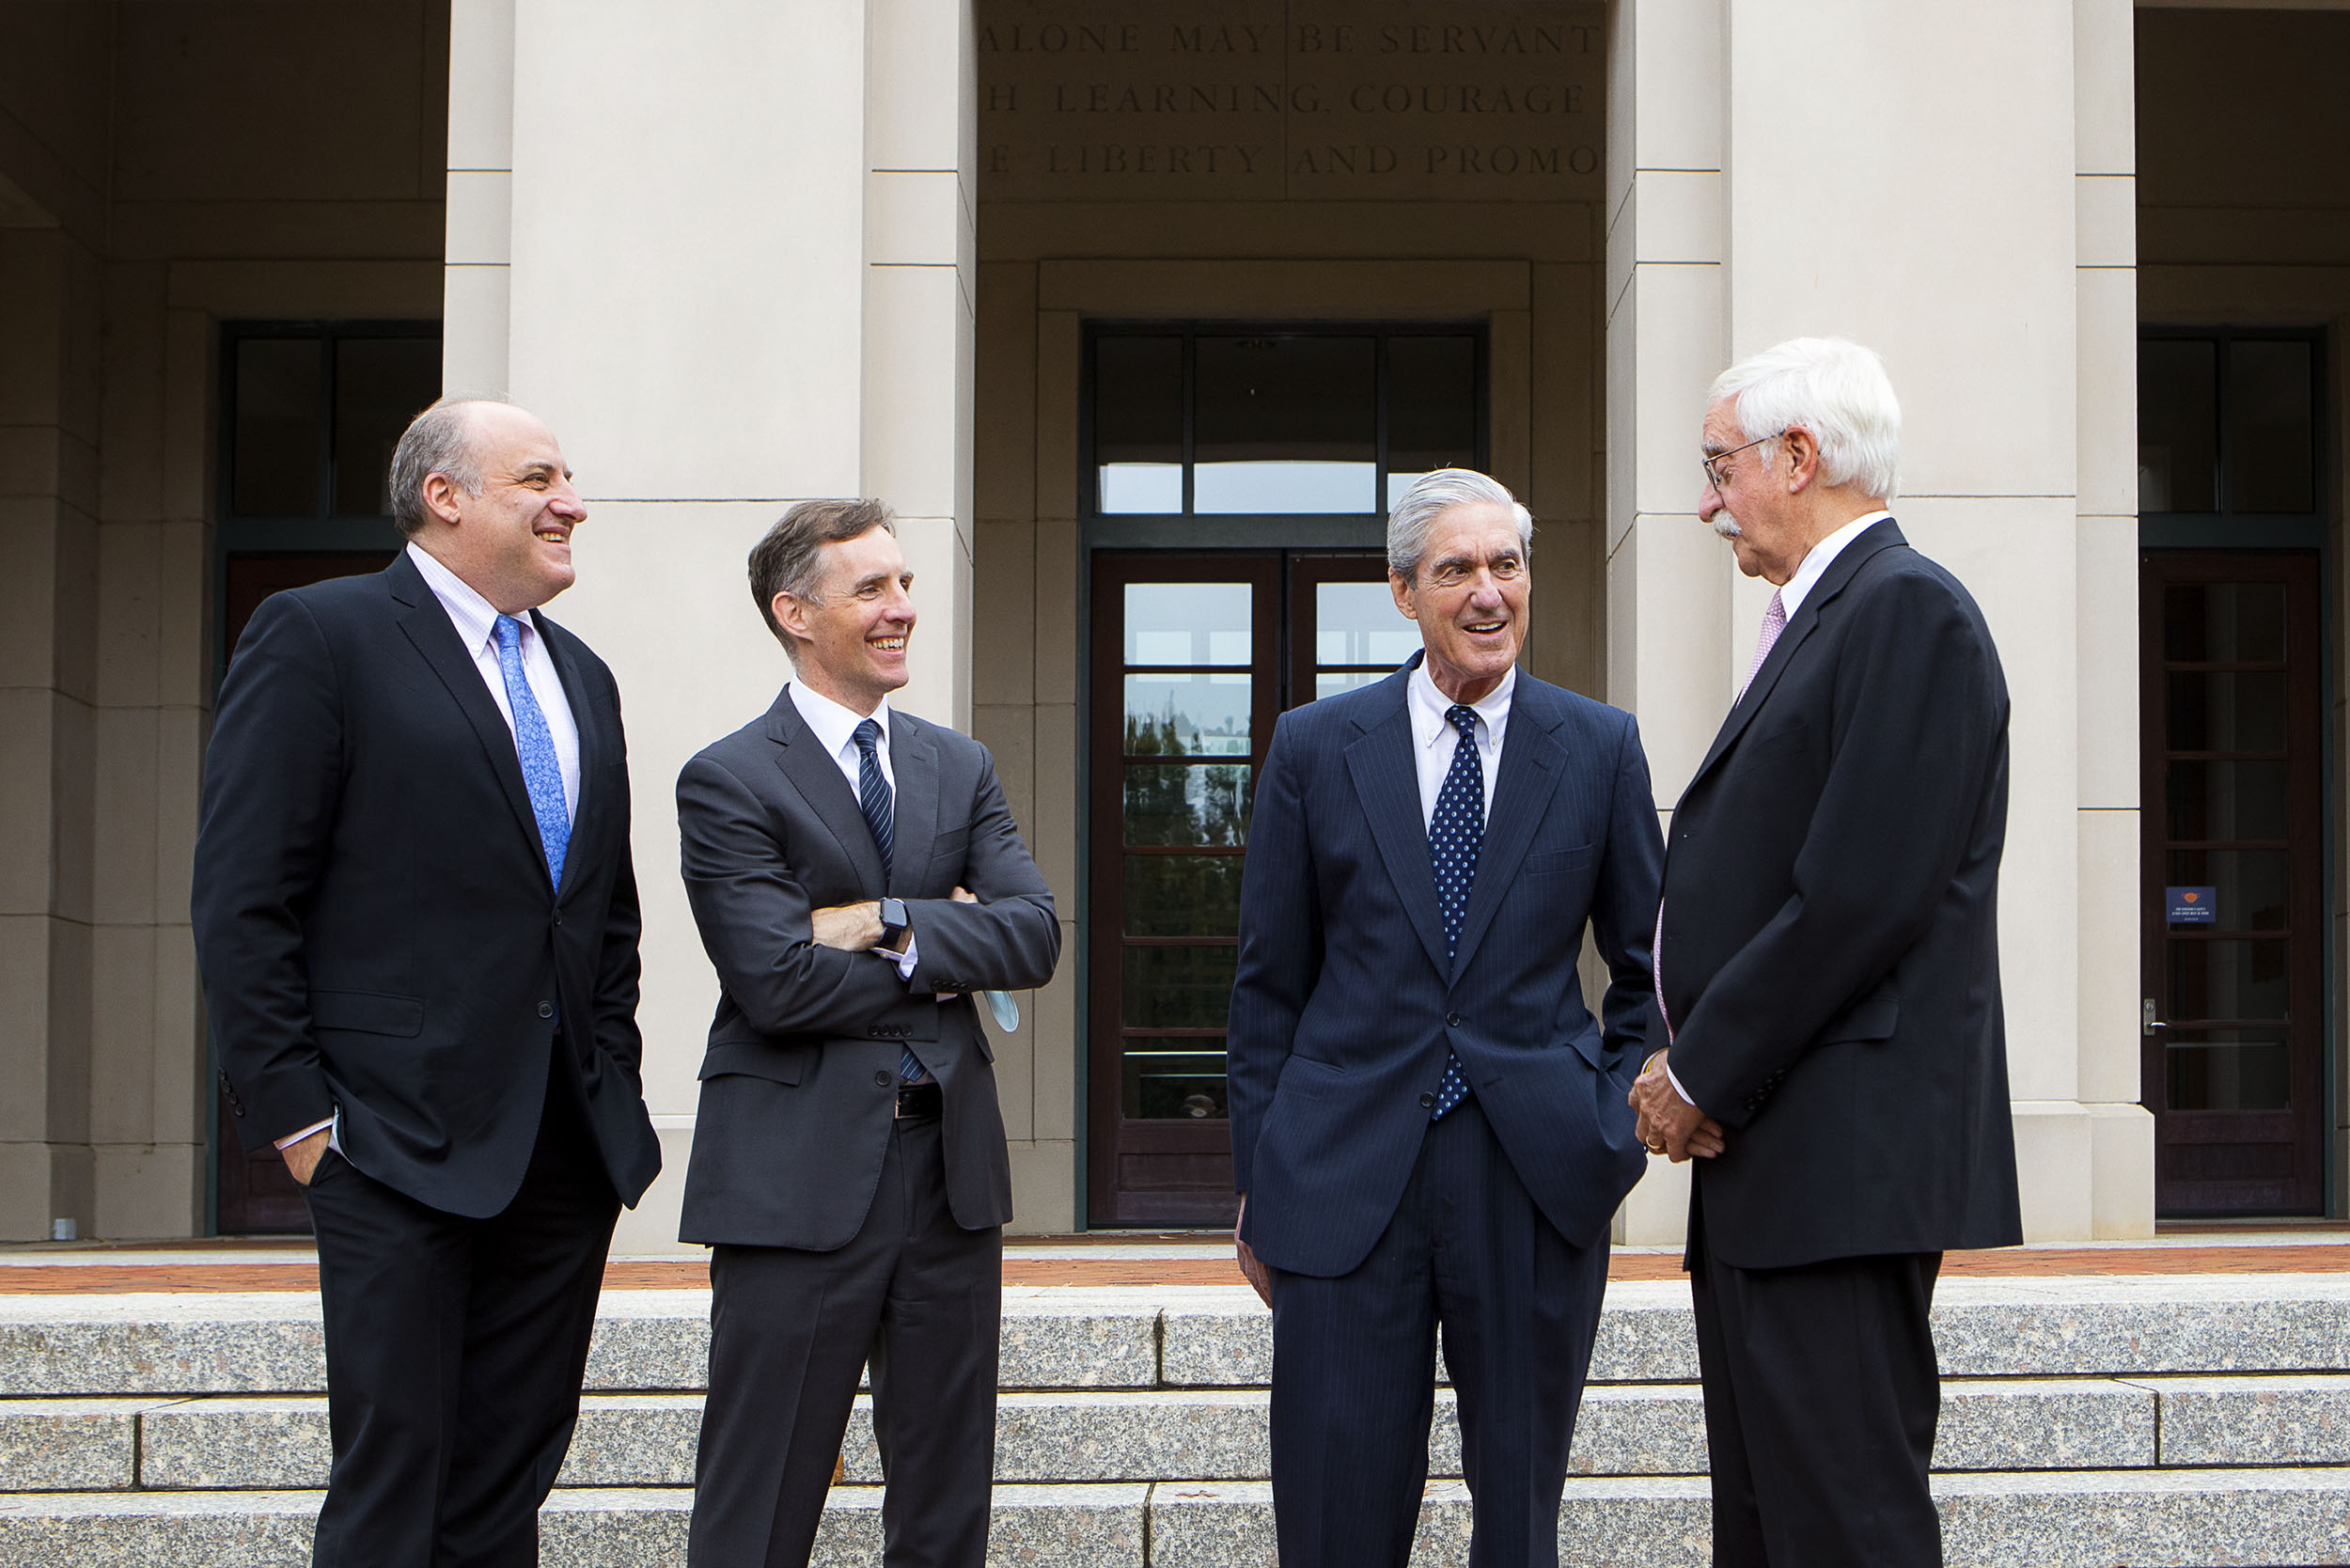 Andrew Goldstein, Aaron Zebley, Robert Mueller and Jim Quarles talking outside of a building in a half circle